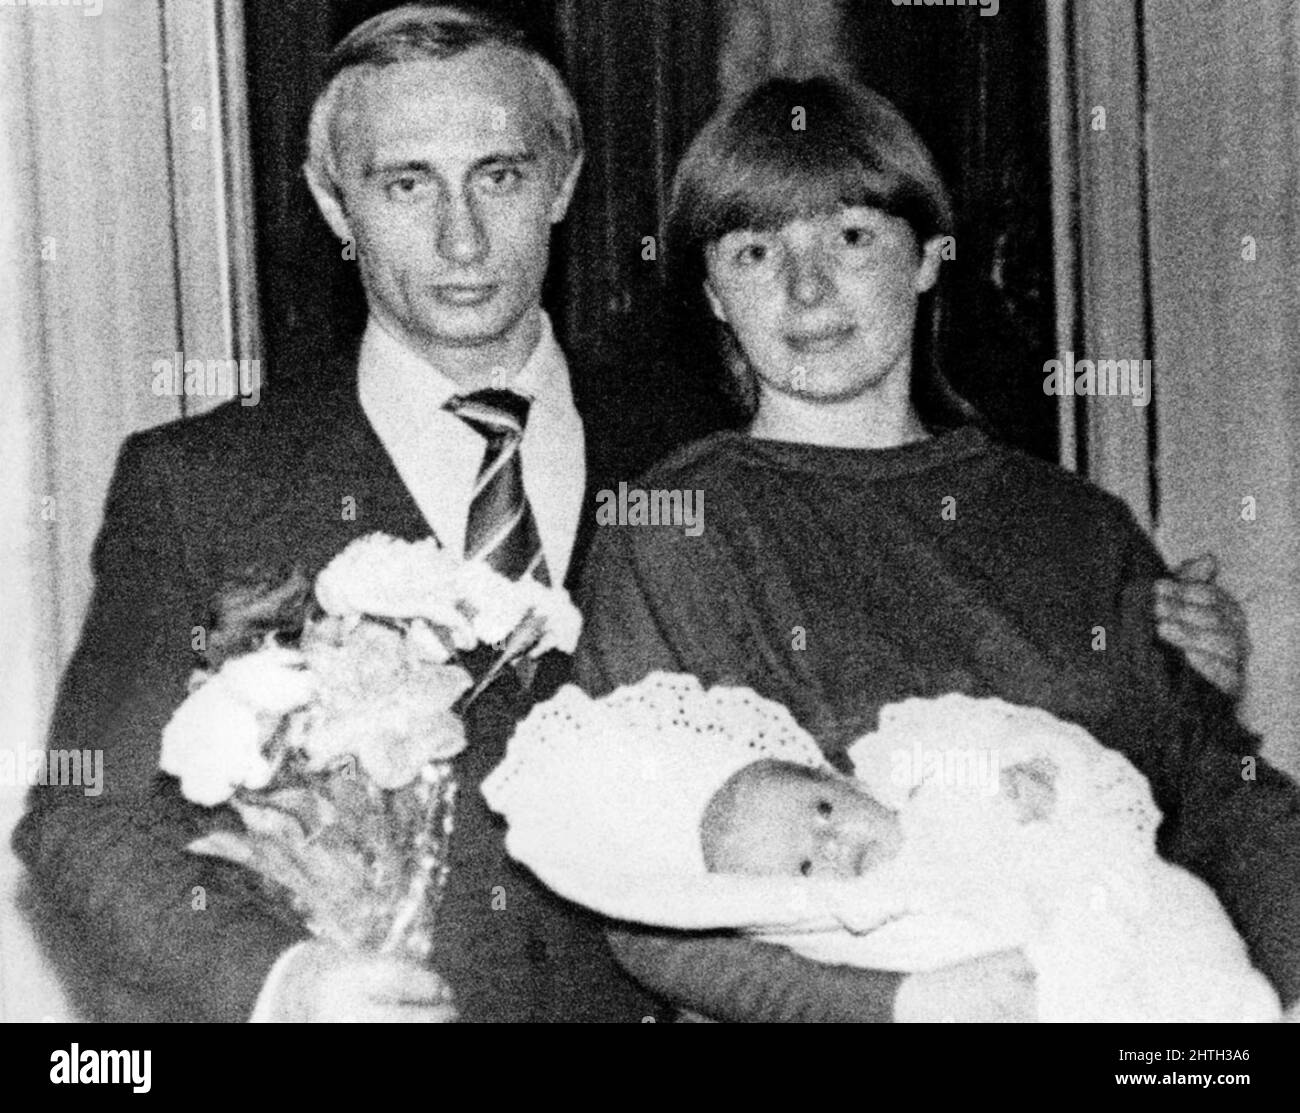 1985 , URSS  : The russian politician VLADIMIR PUTIN ( born in Lelingrad , 7 october 1952 ) with wife  Ljudmila Skrebneva ( born in 1958 ) and daughter Marija Putina . In 1975, Putin joined the KGB like spy and from 1985 to 1990, he served in Dresden , East Germany using a cover identity as a translator. This period in his career is mostly unclear. Unknwnown photographer . - Presidente della Federazione Russa - RUSSIA - POLITICO -  POLITICA - POLITIC - personalità personalità da giovane giovani - personality personalities when was young  --- Archivio GBB Stock Photo